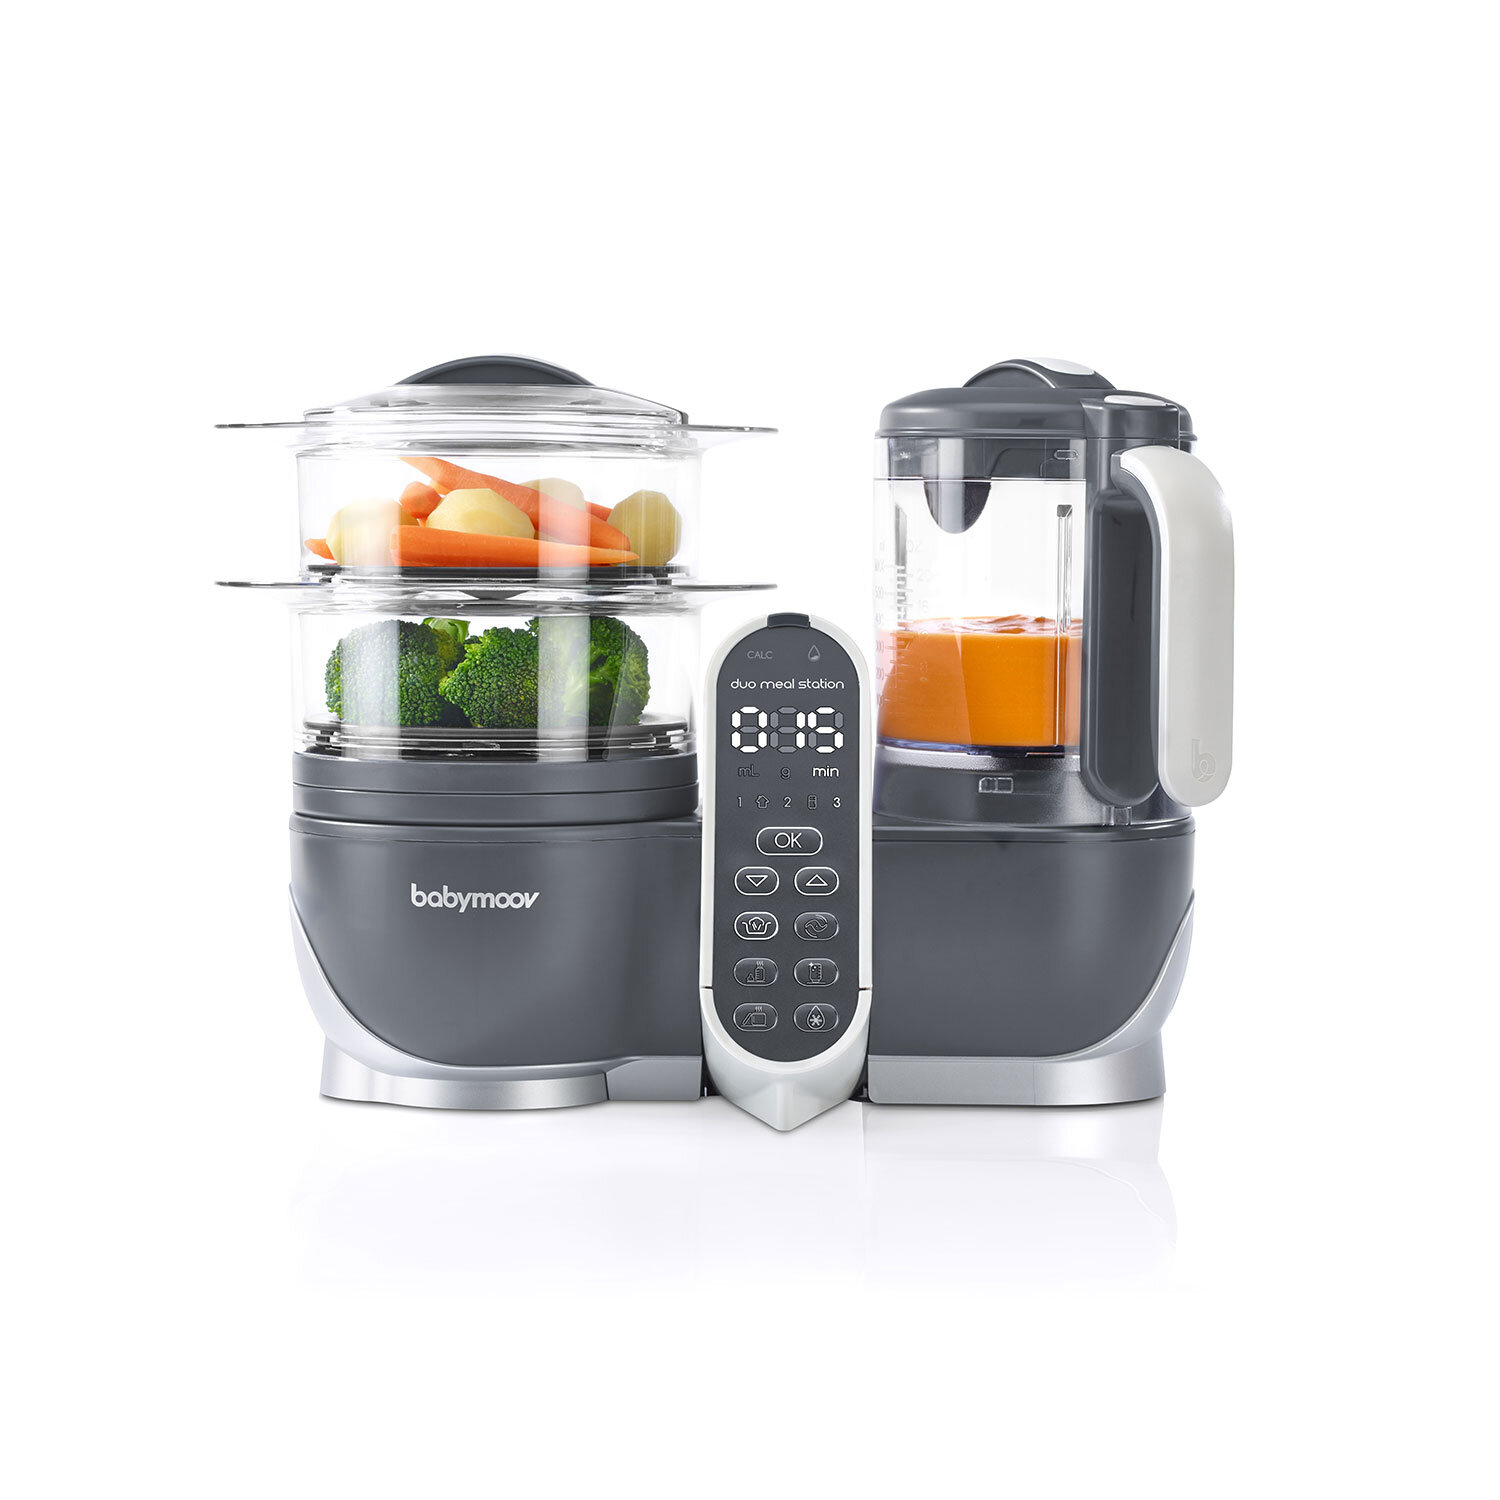 Babymoov Duo Meal Glass Food Maker - Baby Food Processor with Built-in  Glass Steamer, Stainless Steel Basket, and Glass Blender (Over 6 Cup  Capacity)